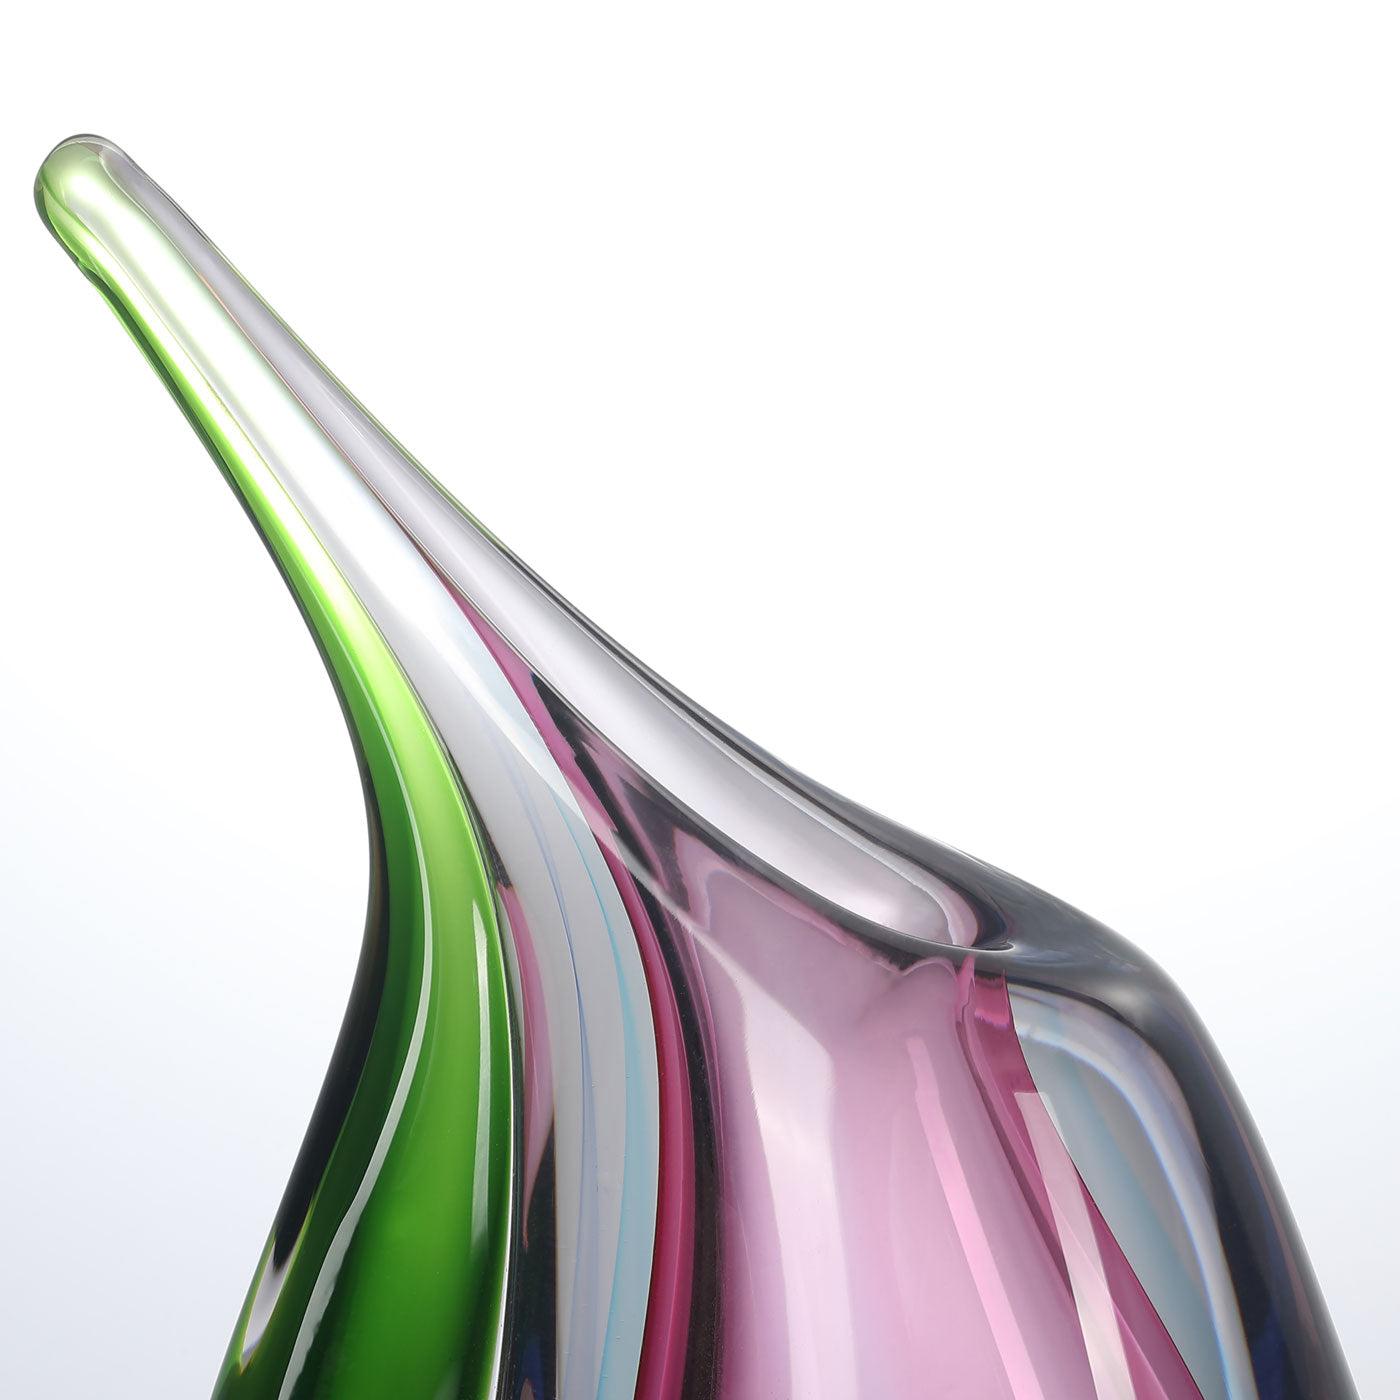 Hand Blown Multicolor Sommerso Teardrop Art Glass Vase with Angled Lip 9.5 inch tall